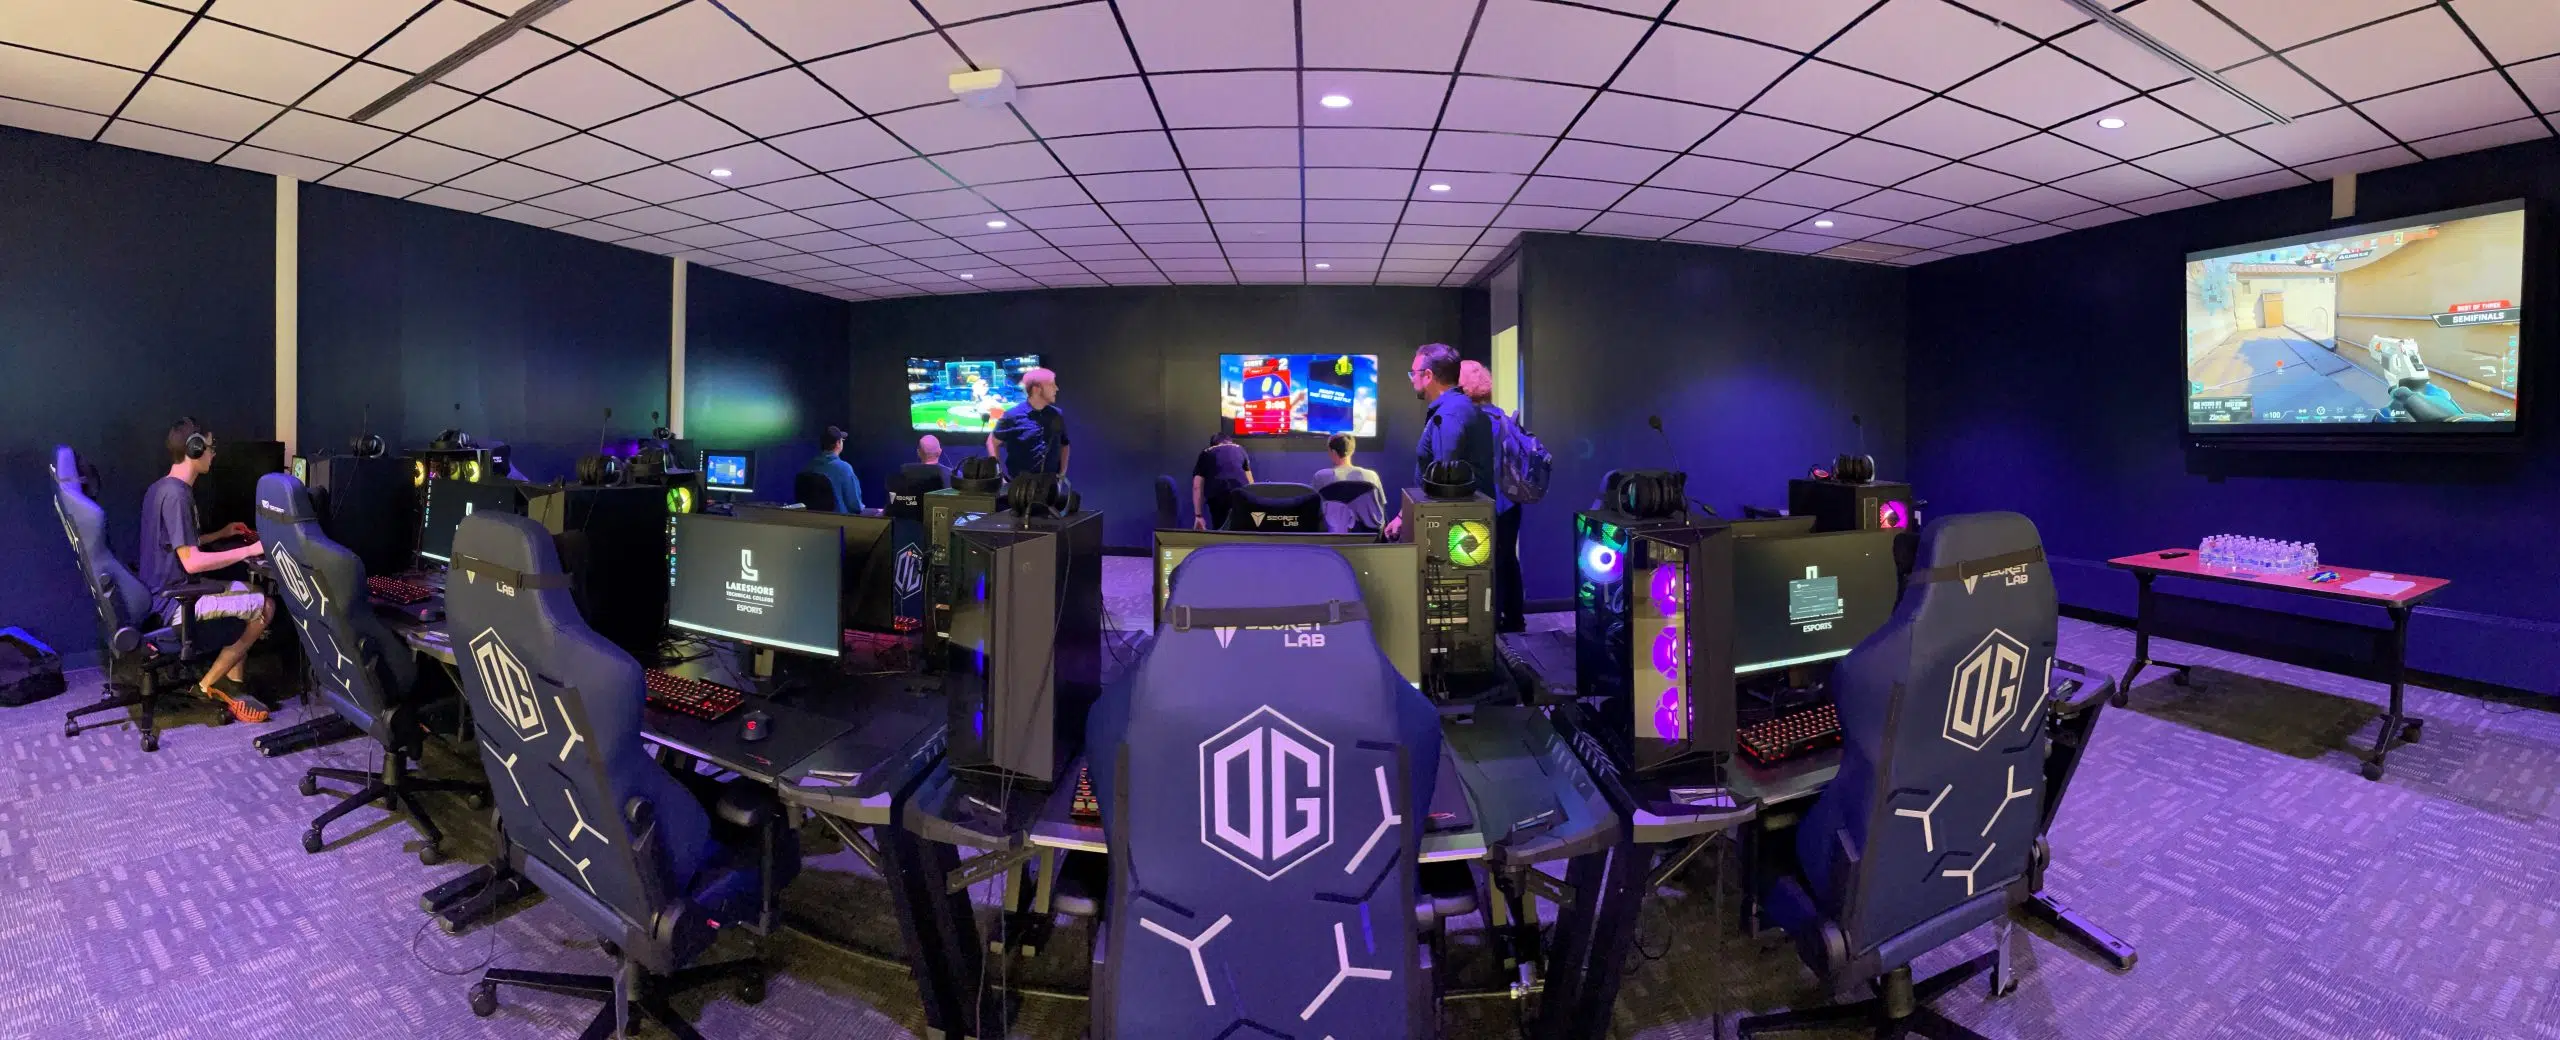 Hundreds Of Wisconsin High School Students Compete In eSports Tournament